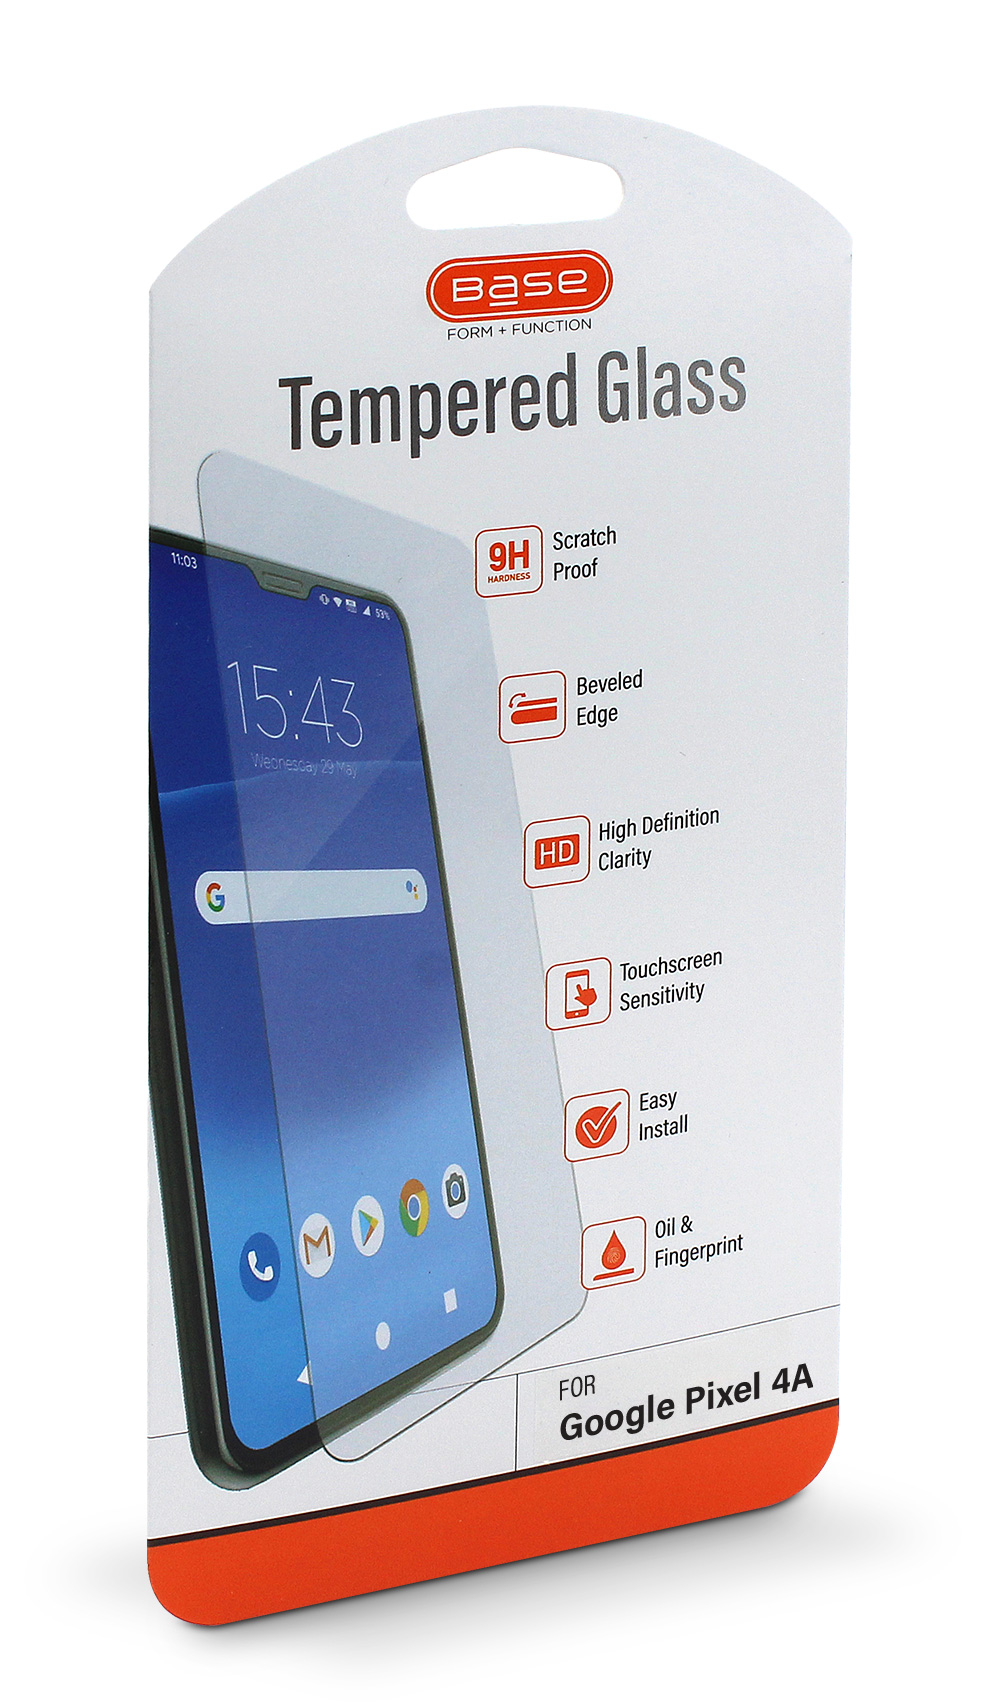 Base Tempered Glass Screen Protector for Google Pixel 4a